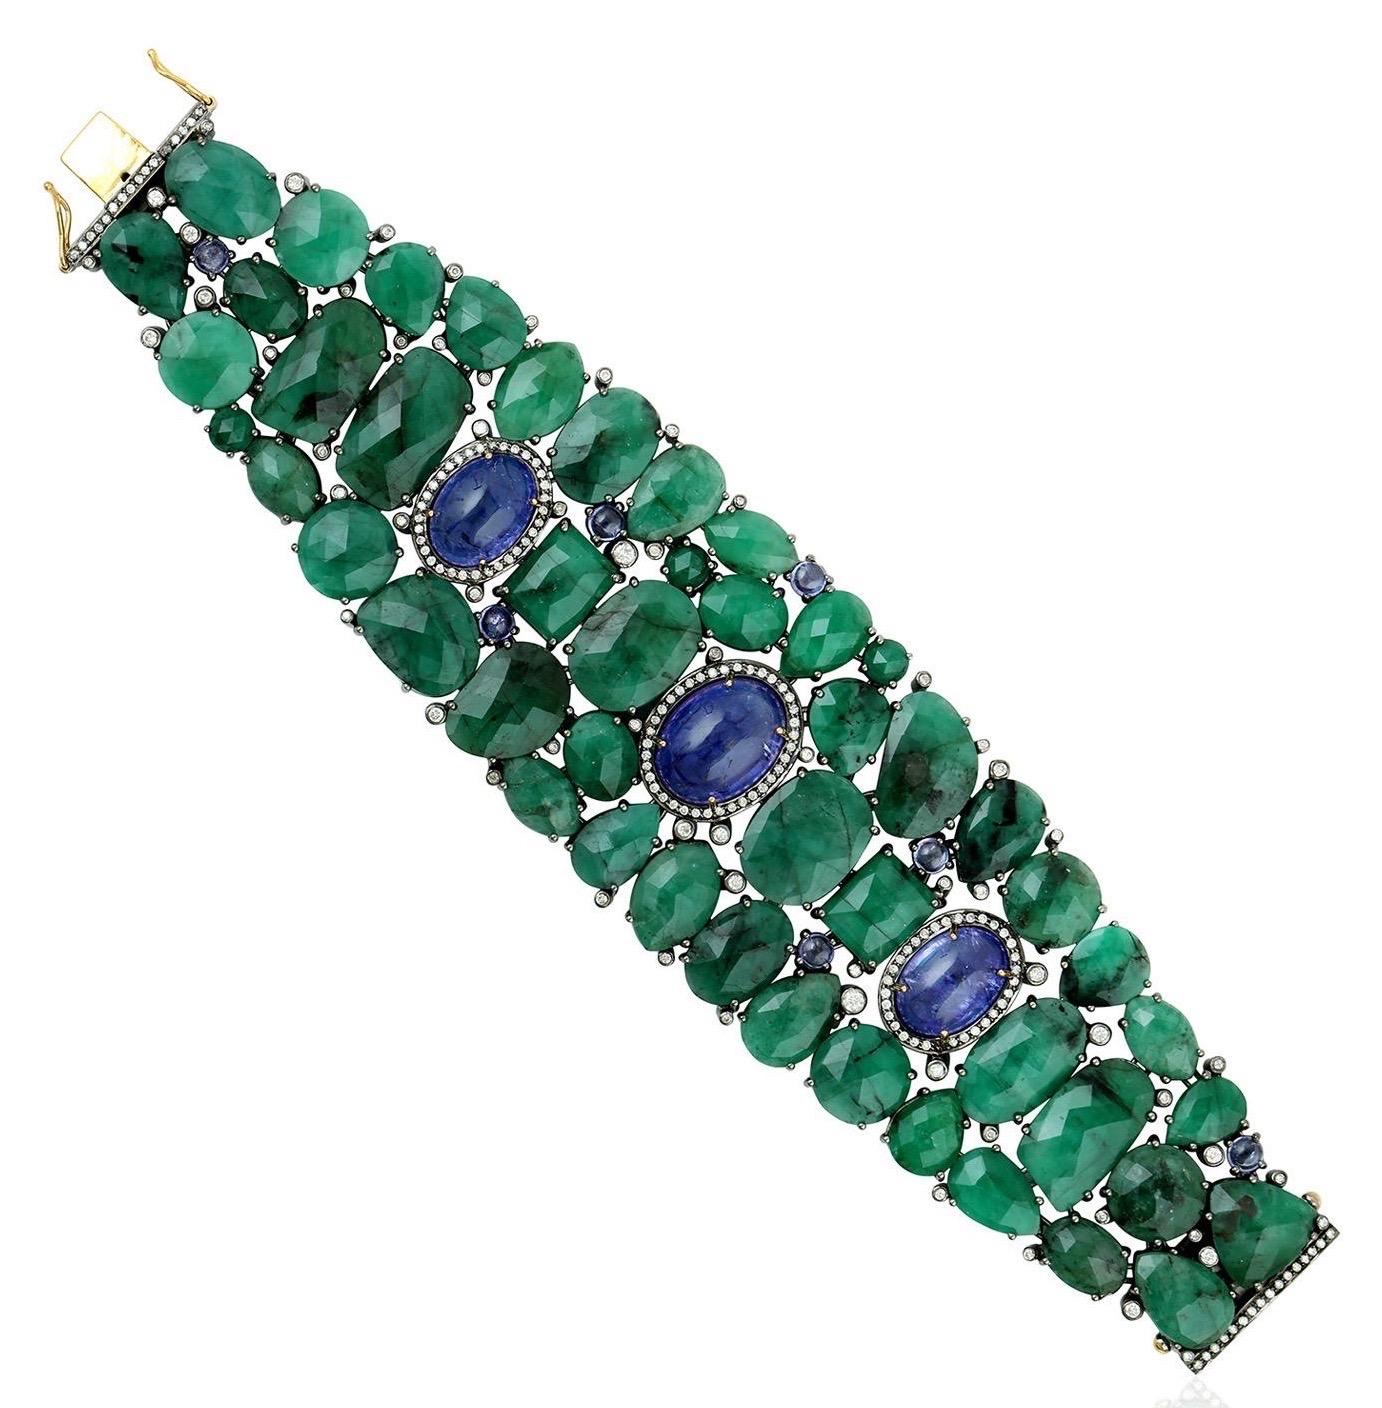 A stunning bracelet handmade in 18K gold and sterling silver. It is set in 123.16 carats emerald, 30.81 carats tanzanite and 1.74 carats of glimmering diamonds. Clasp Closure

FOLLOW  MEGHNA JEWELS storefront to view the latest collection &